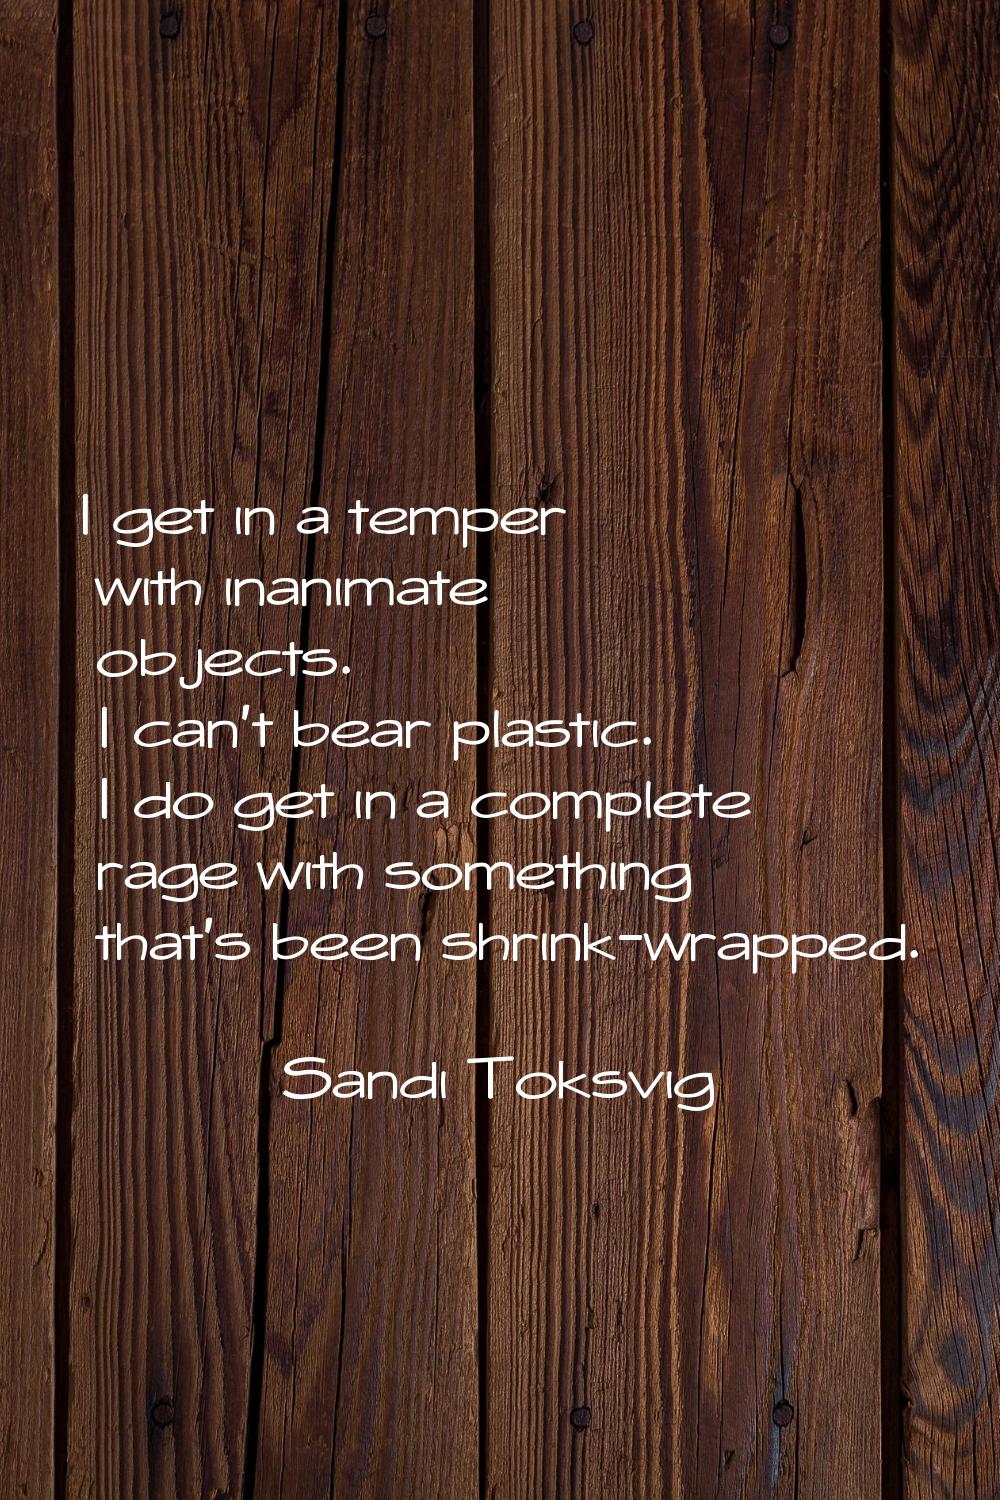 I get in a temper with inanimate objects. I can't bear plastic. I do get in a complete rage with so